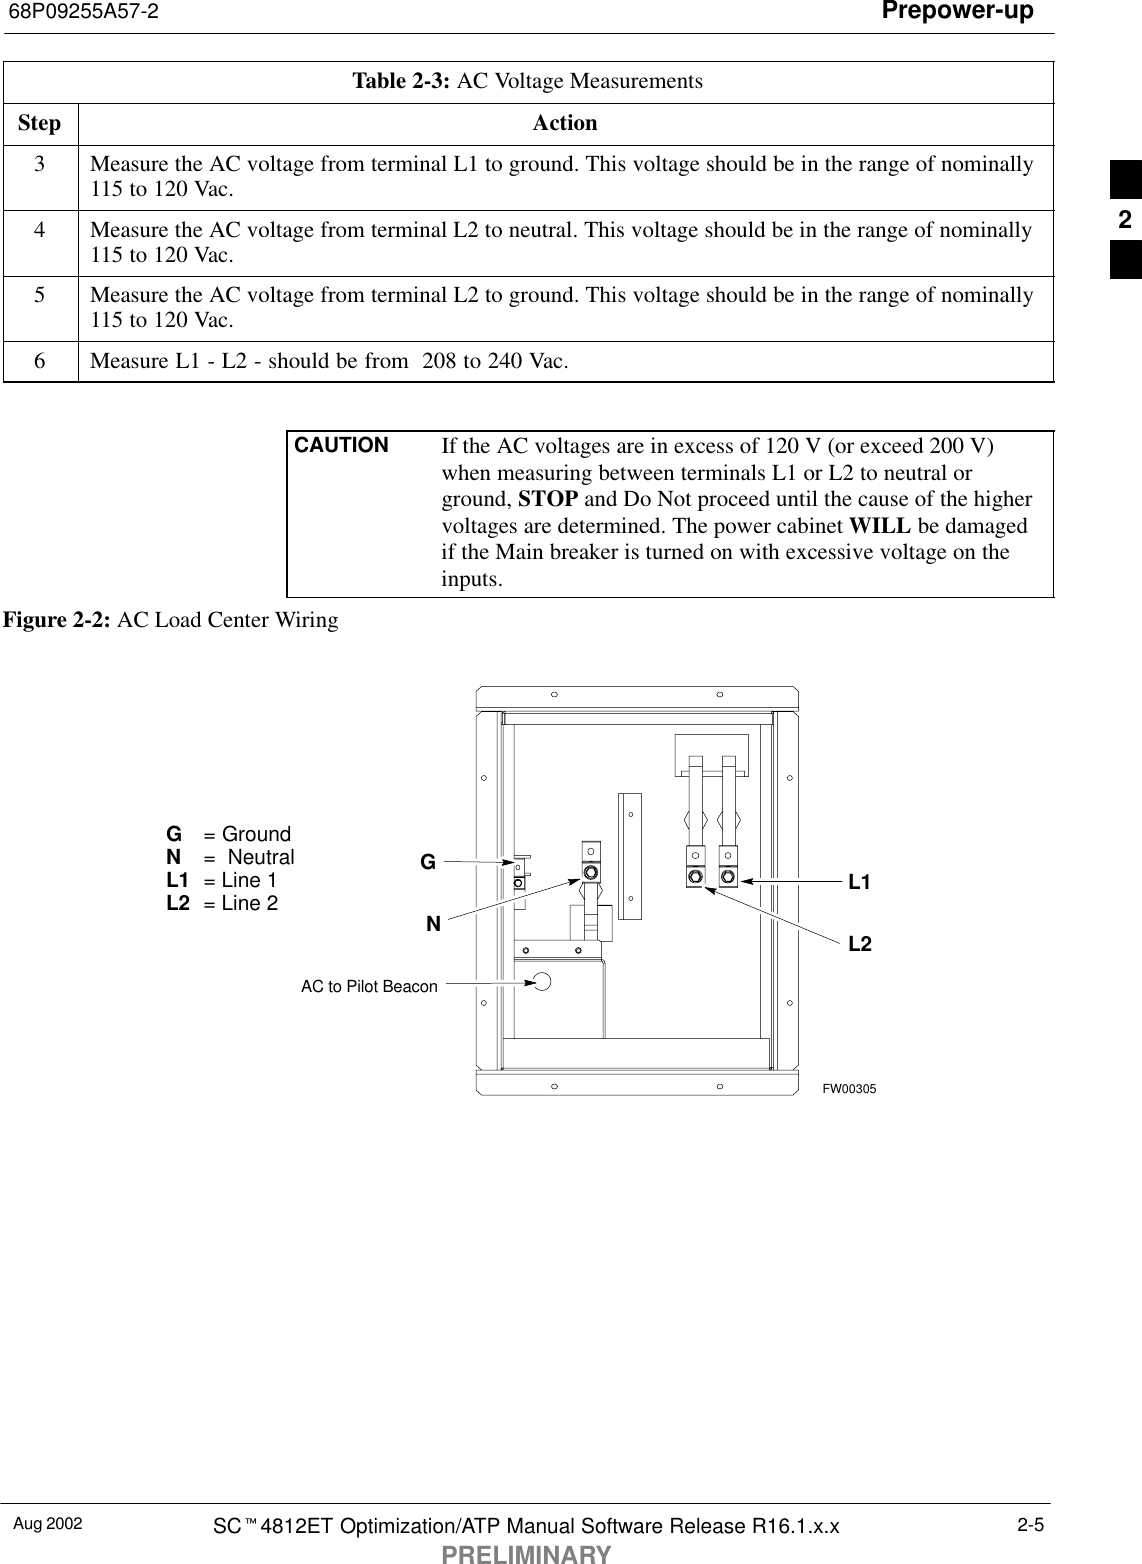 Prepower-up68P09255A57-2Aug 2002 SCt4812ET Optimization/ATP Manual Software Release R16.1.x.xPRELIMINARY2-5Table 2-3: AC Voltage MeasurementsStep Action3Measure the AC voltage from terminal L1 to ground. This voltage should be in the range of nominally115 to 120 Vac.4Measure the AC voltage from terminal L2 to neutral. This voltage should be in the range of nominally115 to 120 Vac.5Measure the AC voltage from terminal L2 to ground. This voltage should be in the range of nominally115 to 120 Vac.6Measure L1 - L2 - should be from  208 to 240 Vac. CAUTION If the AC voltages are in excess of 120 V (or exceed 200 V)when measuring between terminals L1 or L2 to neutral orground, STOP and Do Not proceed until the cause of the highervoltages are determined. The power cabinet WILL be damagedif the Main breaker is turned on with excessive voltage on theinputs.Figure 2-2: AC Load Center Wiring  G= GroundN  =  NeutralL1 = Line 1L2 = Line 2GNAC to Pilot BeaconL2L1FW003052